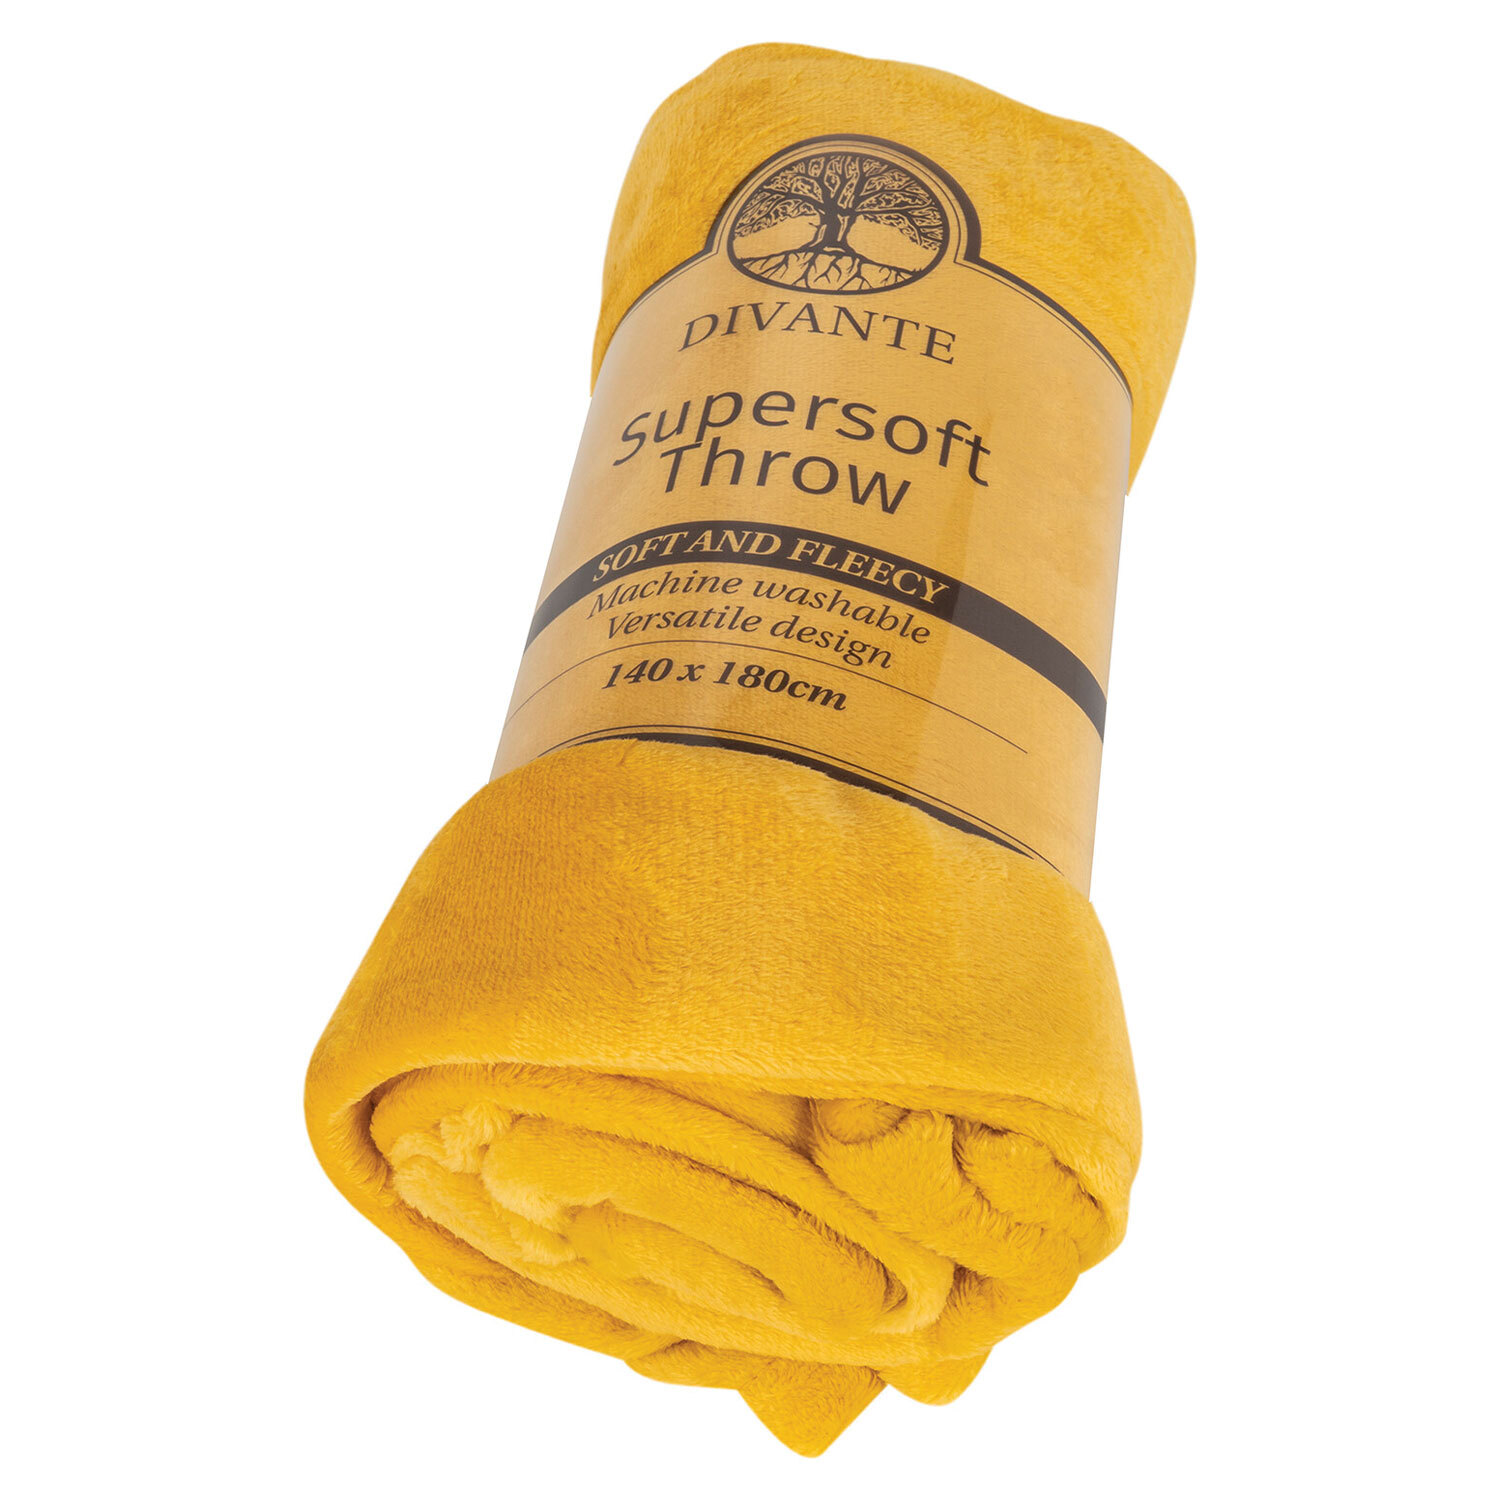 Divante Yellow Supersoft Large Throw 140 x 180cm Image 1